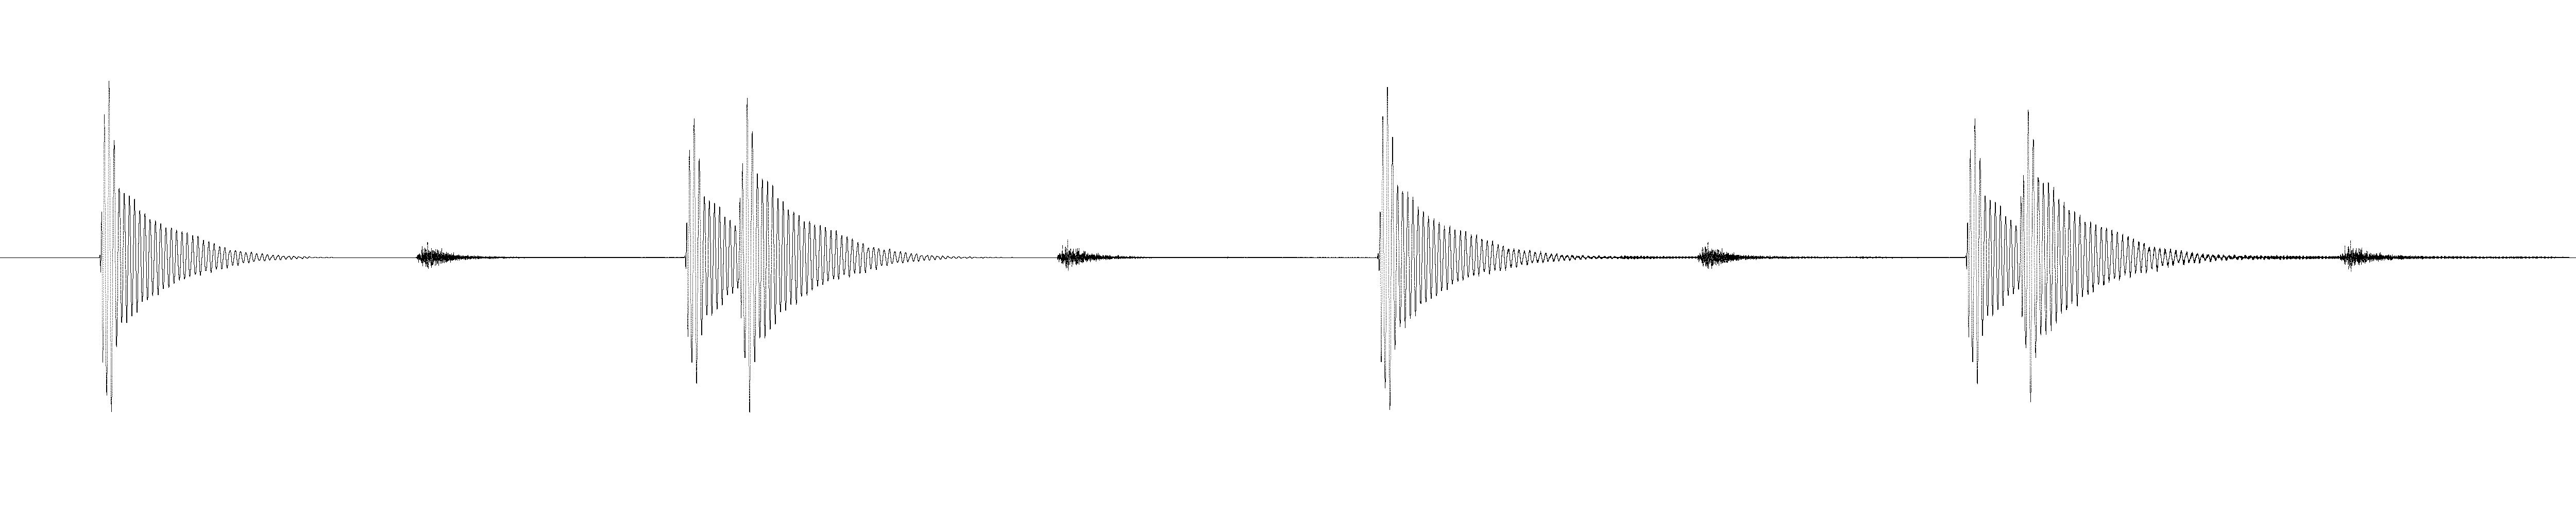 Example 1: Lowpassed Waveform of a short sample